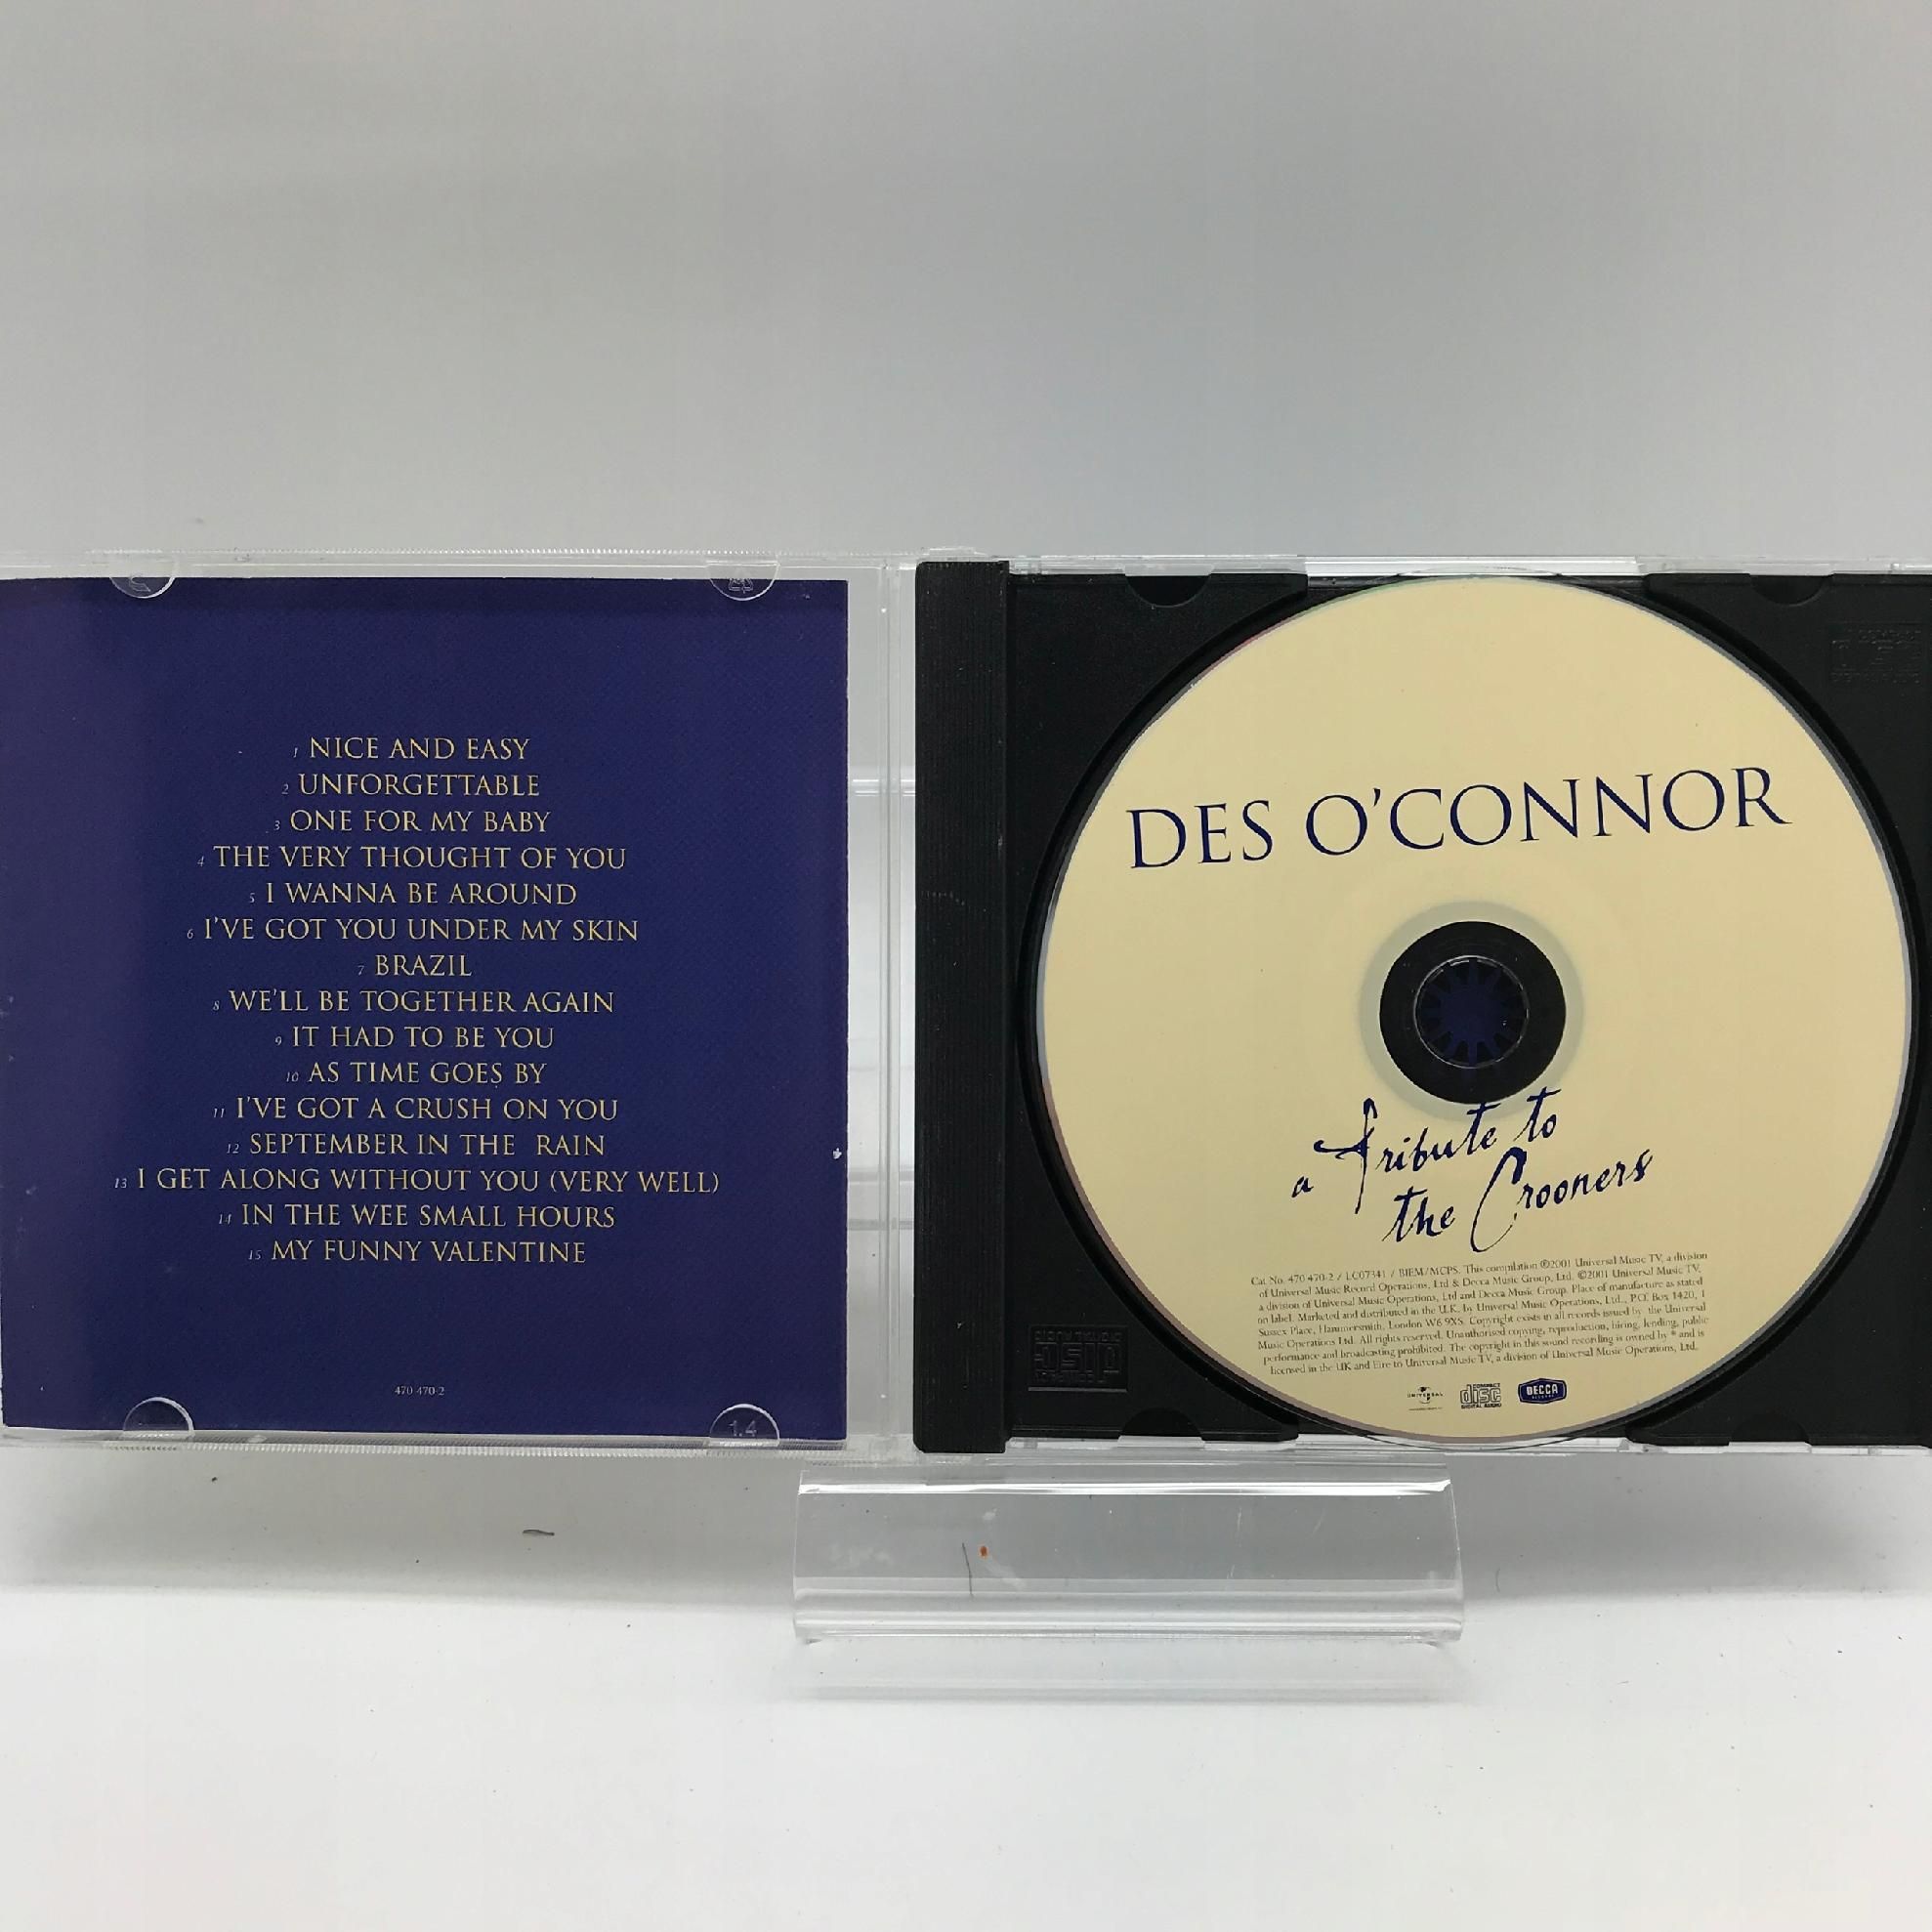 Cd - Des O'Connor - Tribute To The Crooners 2001 Muzyka Klasyczna